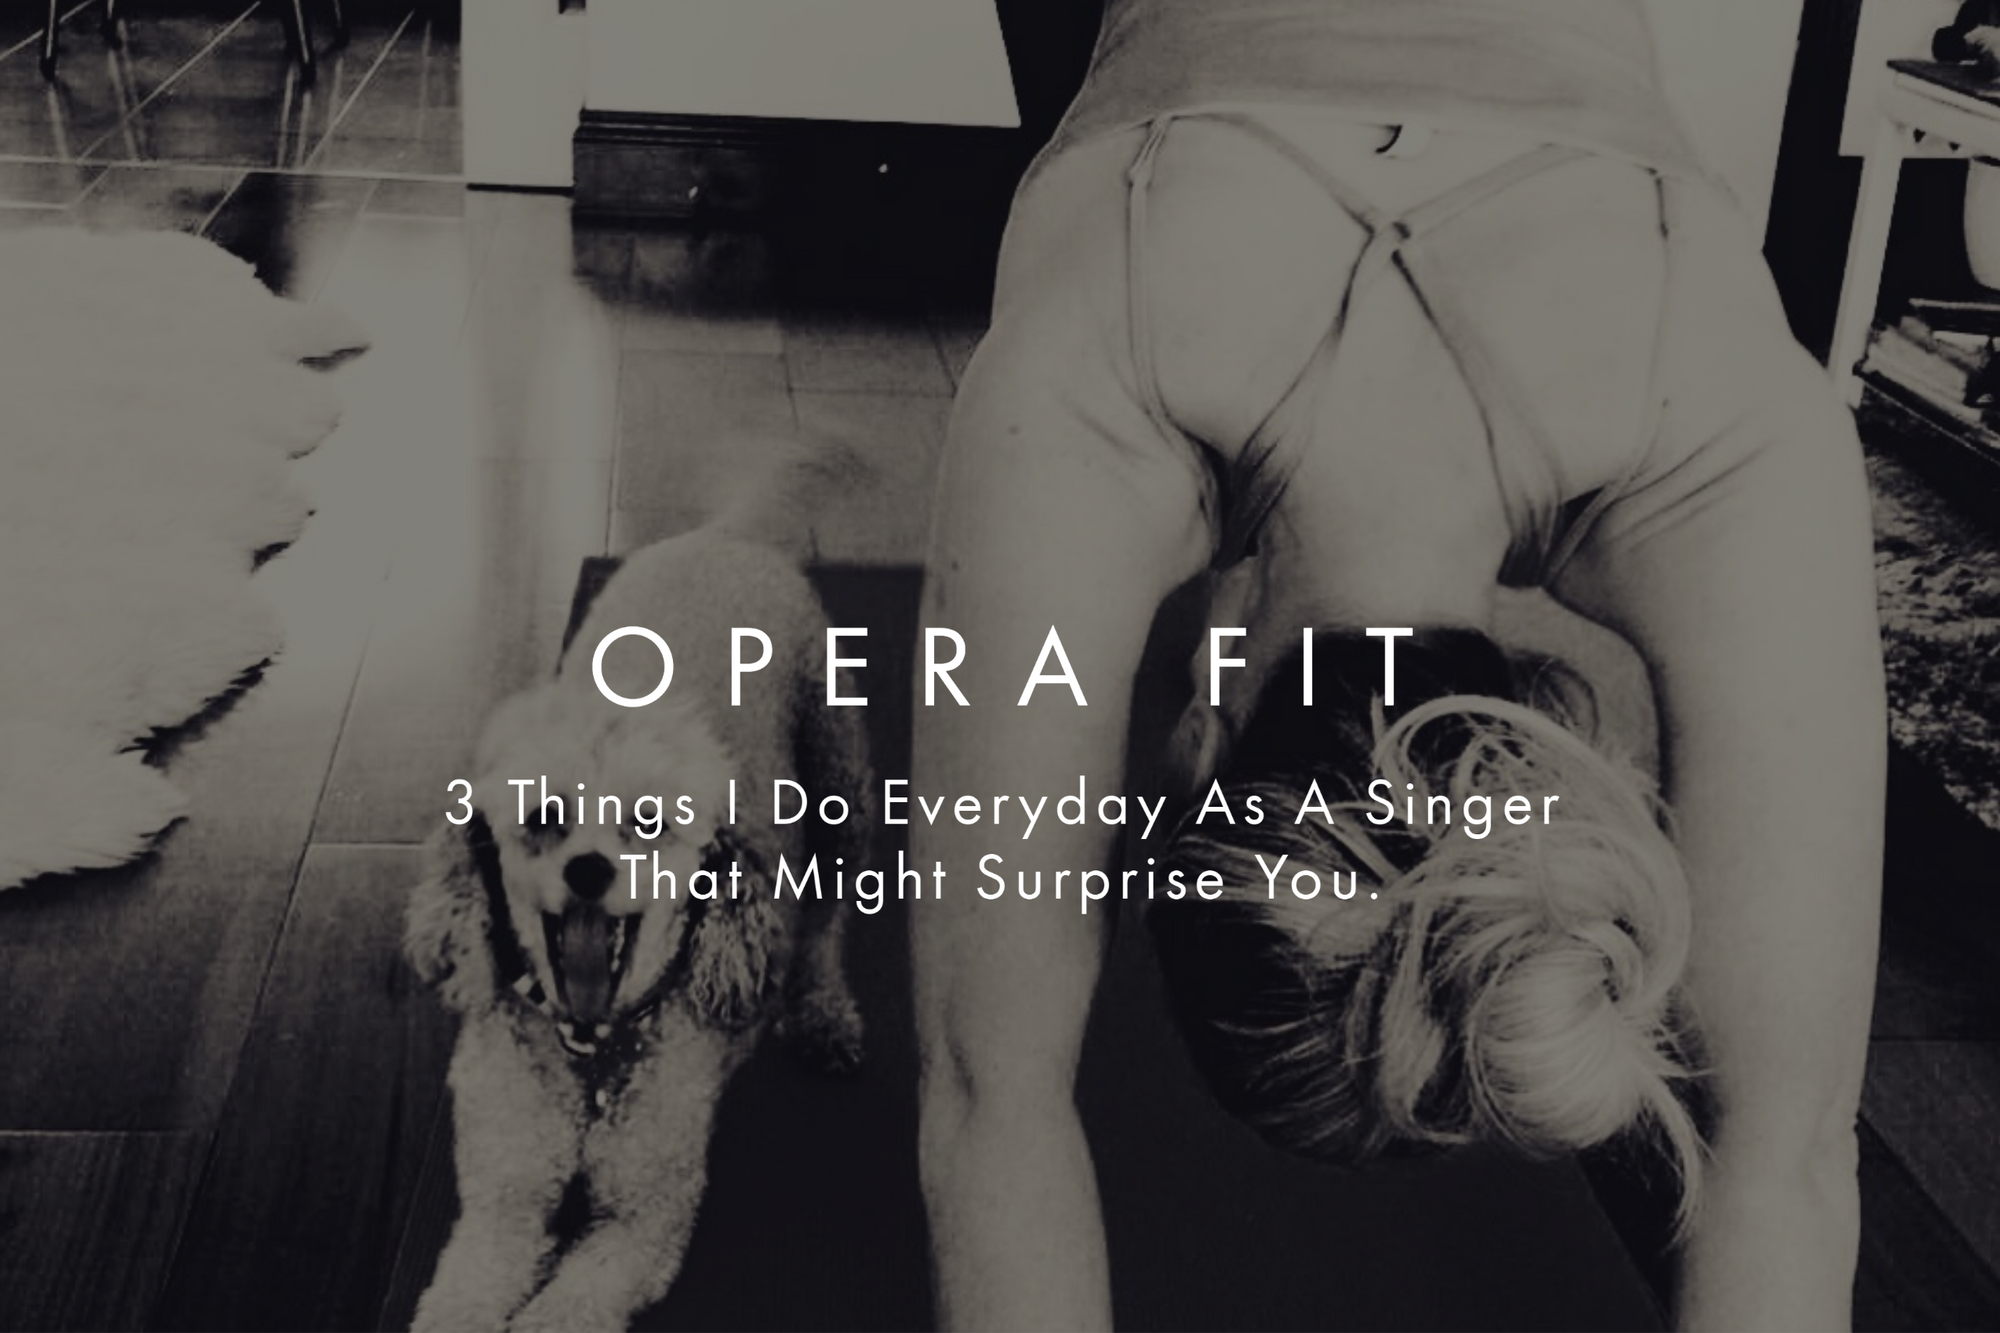 3 things I do everyday as a singer